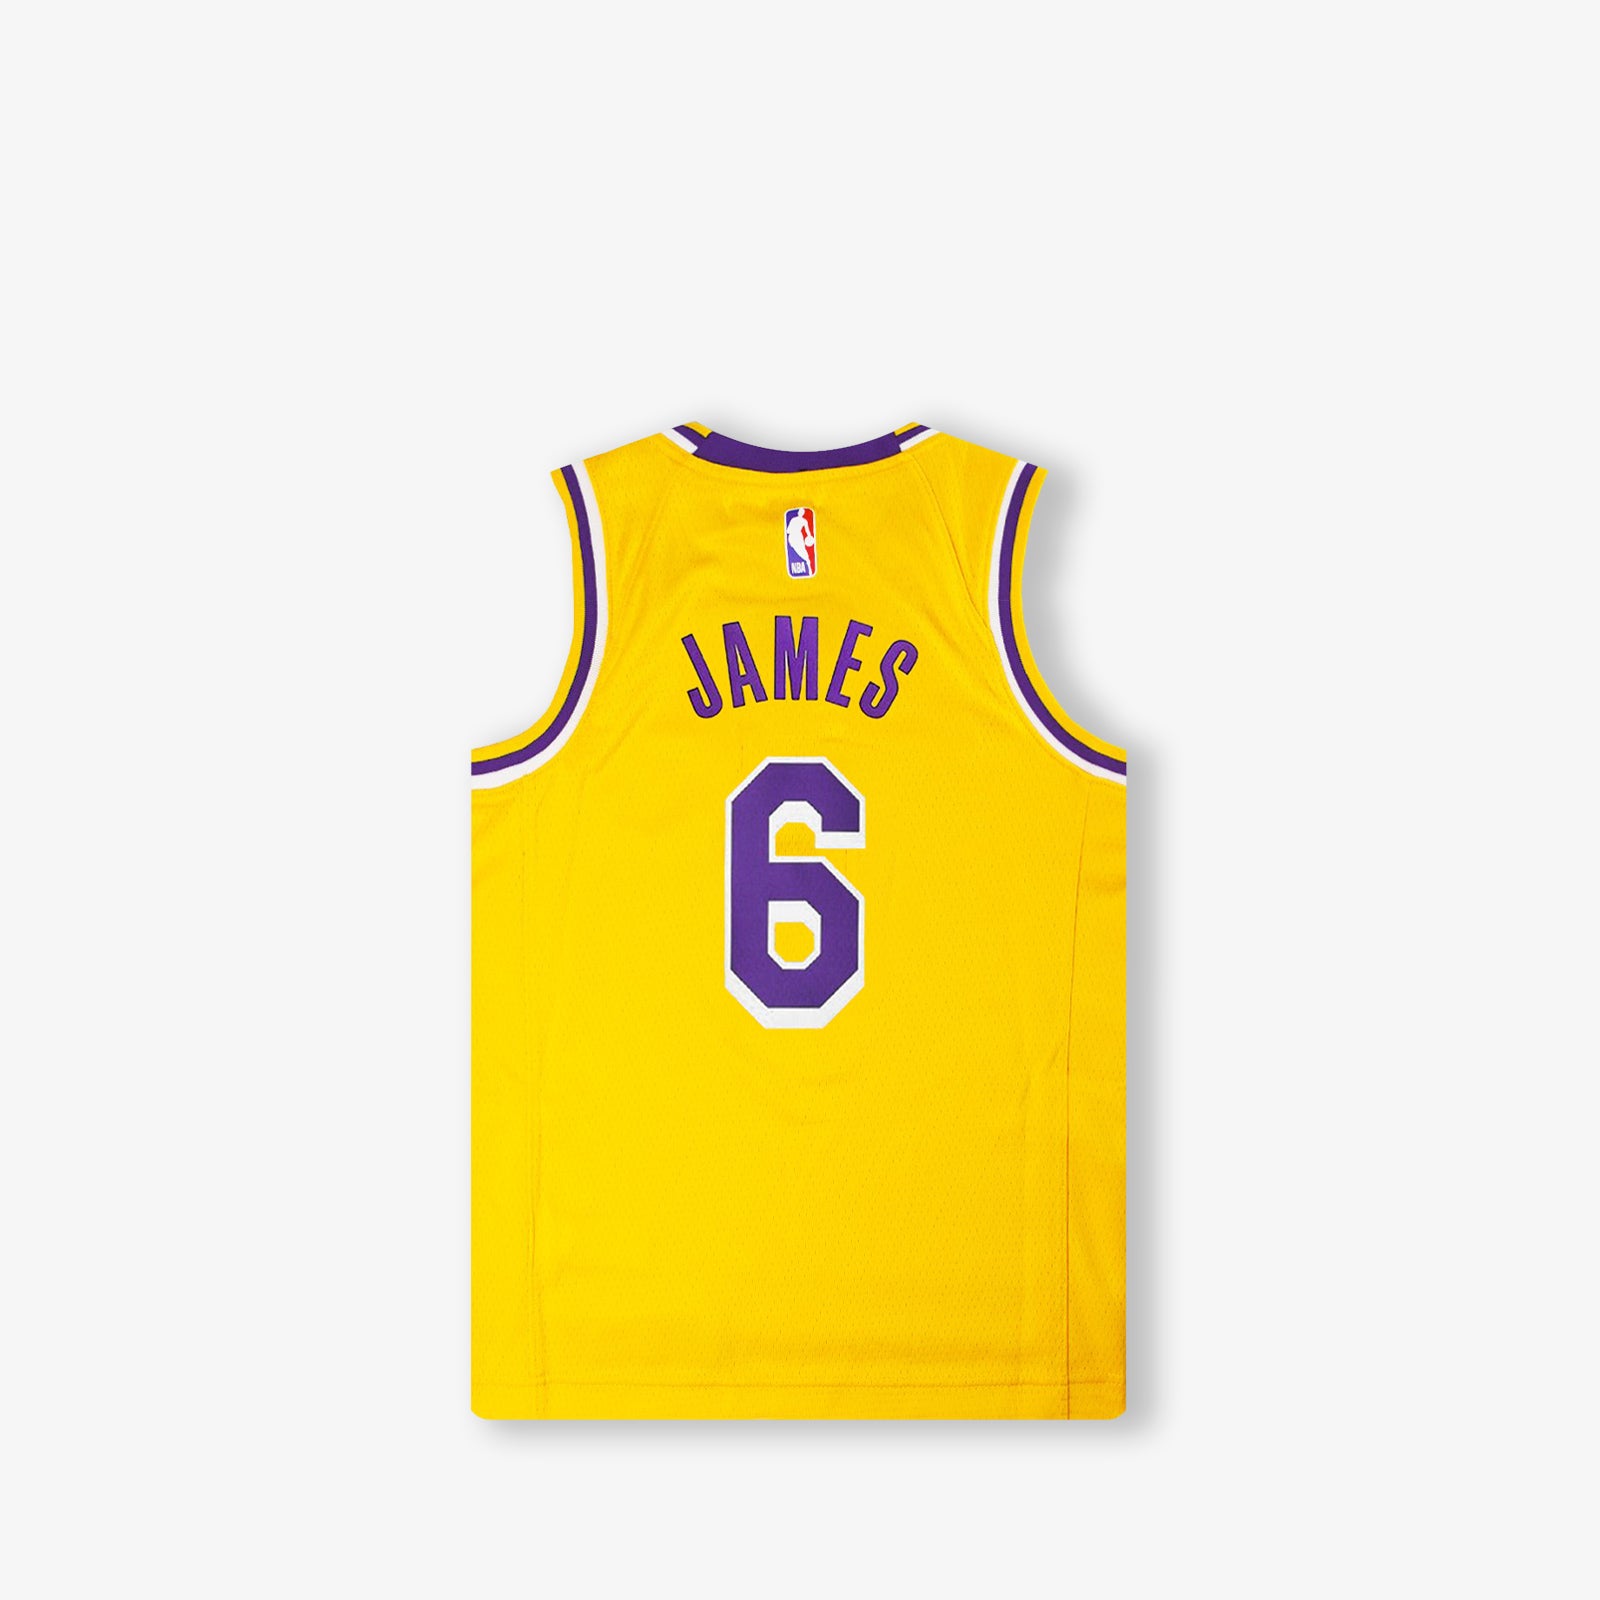 lakers youth jerseys lebron james